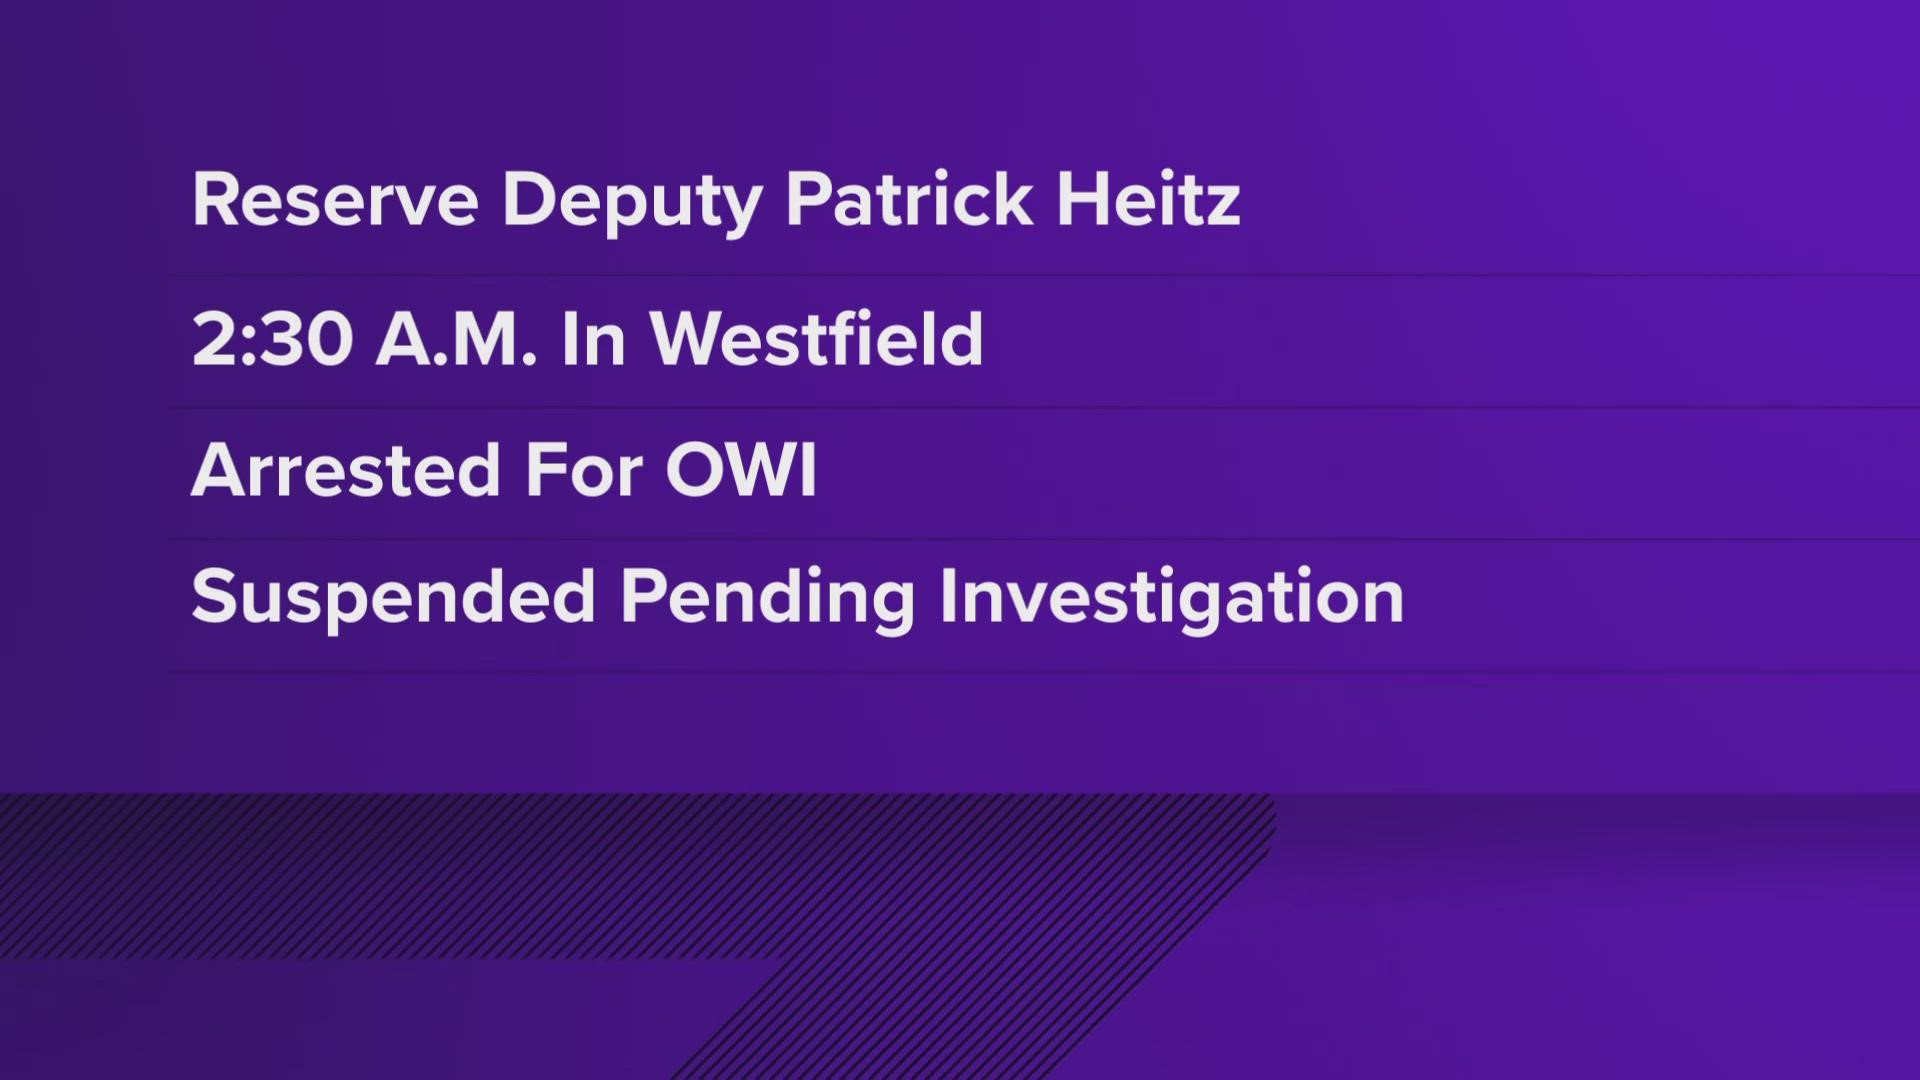 Deputy Patrick Heitz was driving his personal vehicle when he was pulled over near West 116th Street and Towne Road at around 2:30 a.m.